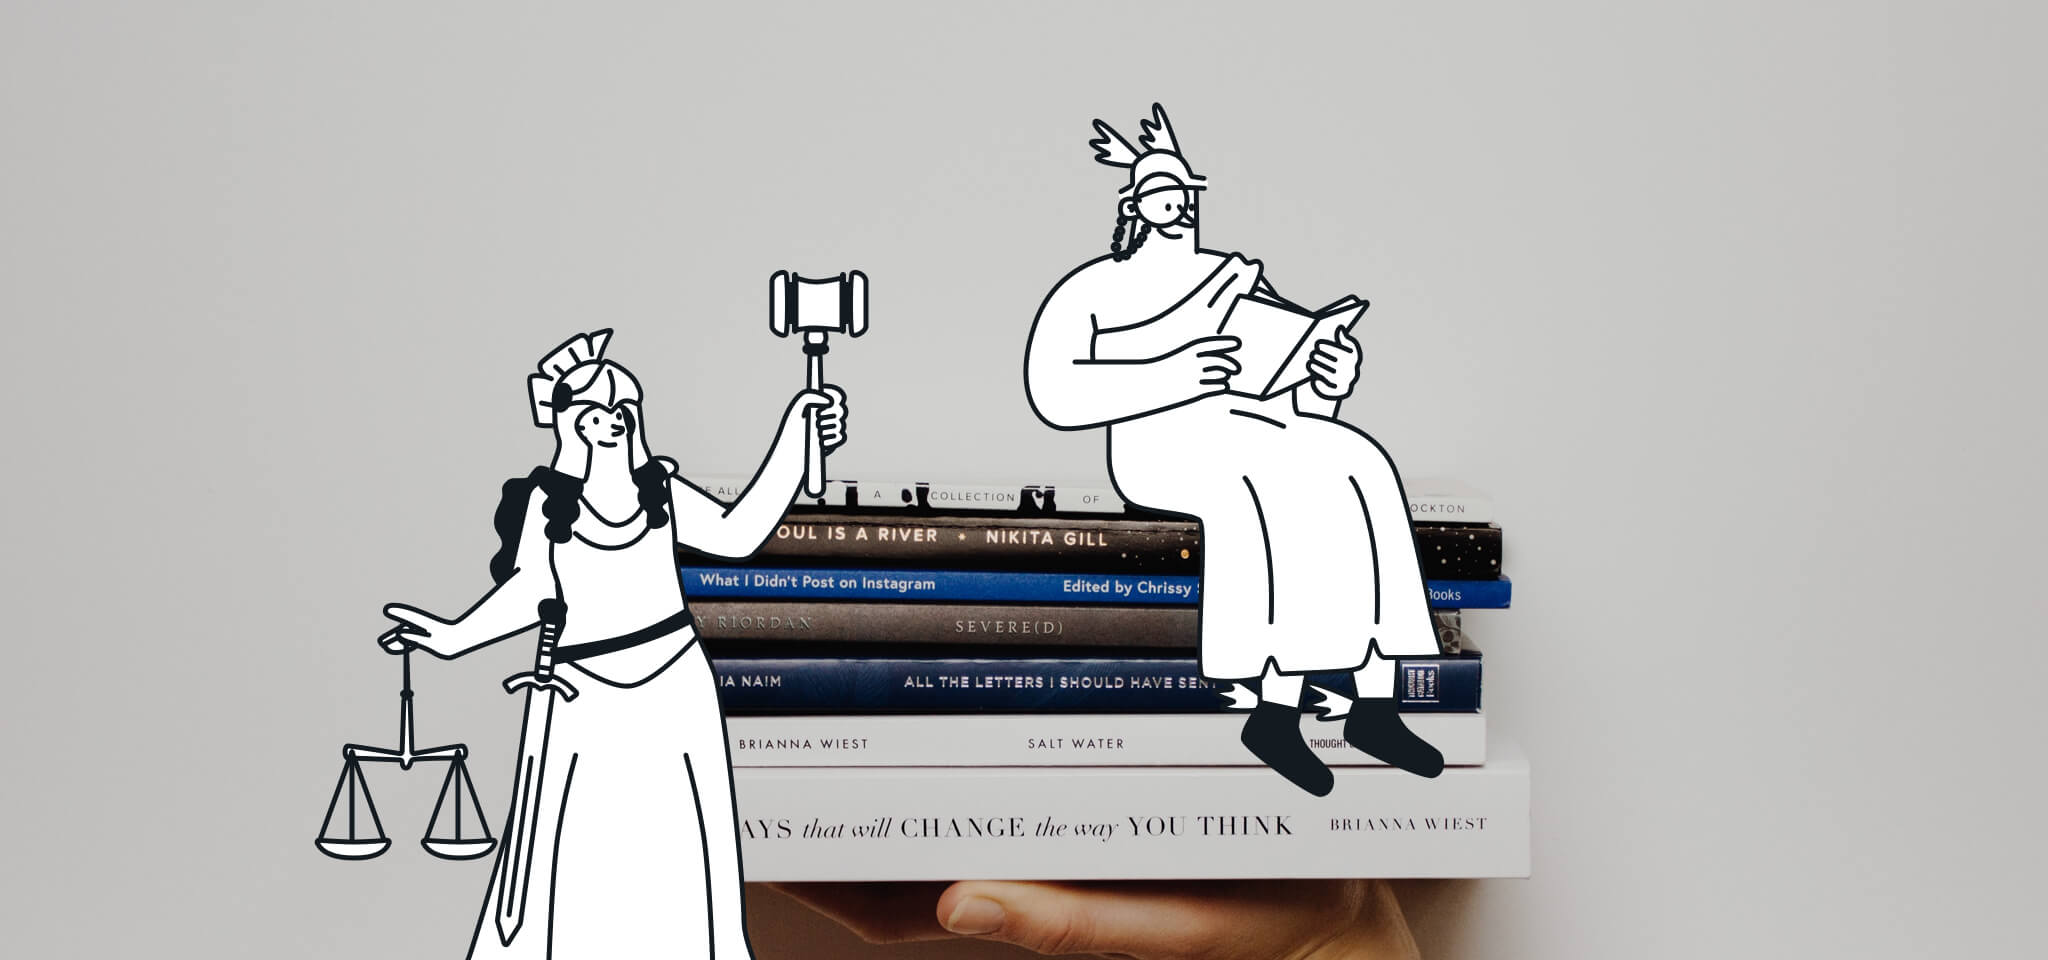 Hermes reads while a Goddess delivers justice on some books